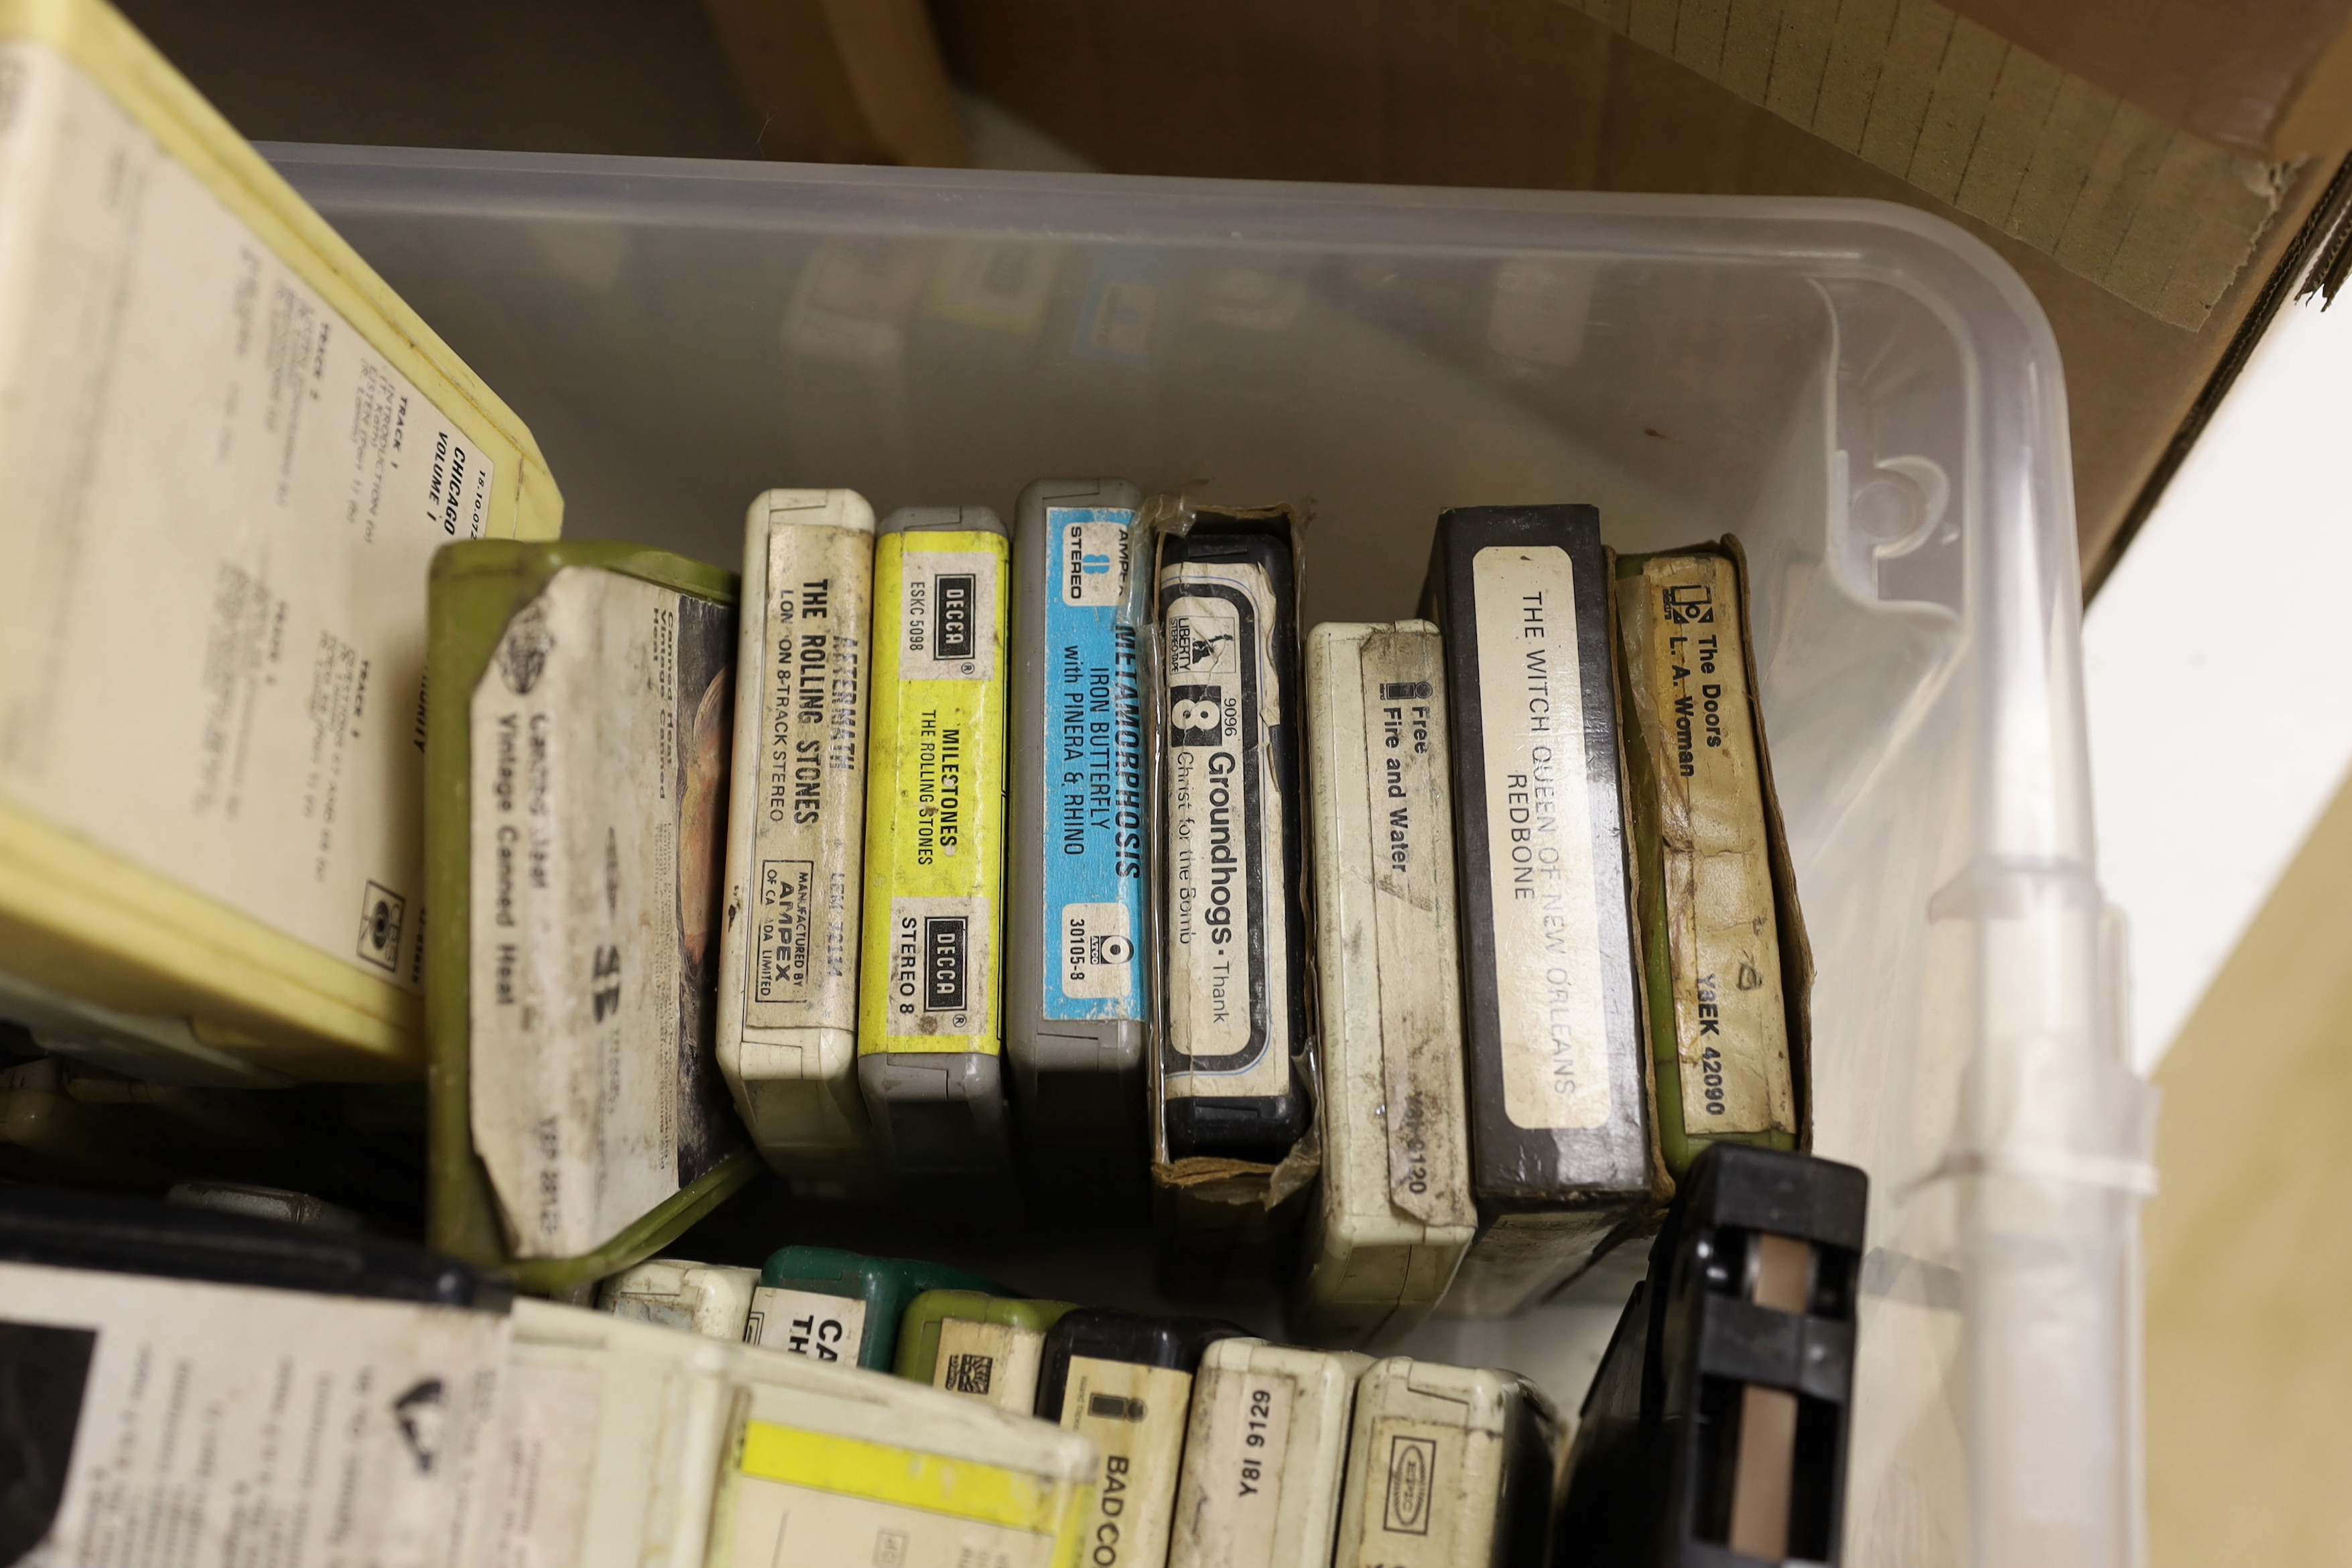 A collection of approximately fifty 8 track cassettes from the 1970's, including Fleetwood Mac, Santana, Jimi Hendrix, Chicago, The Beach Boys, Strawbs, Emerson, Lake & Palmer, Led Zeppelin, The Doors, etc.